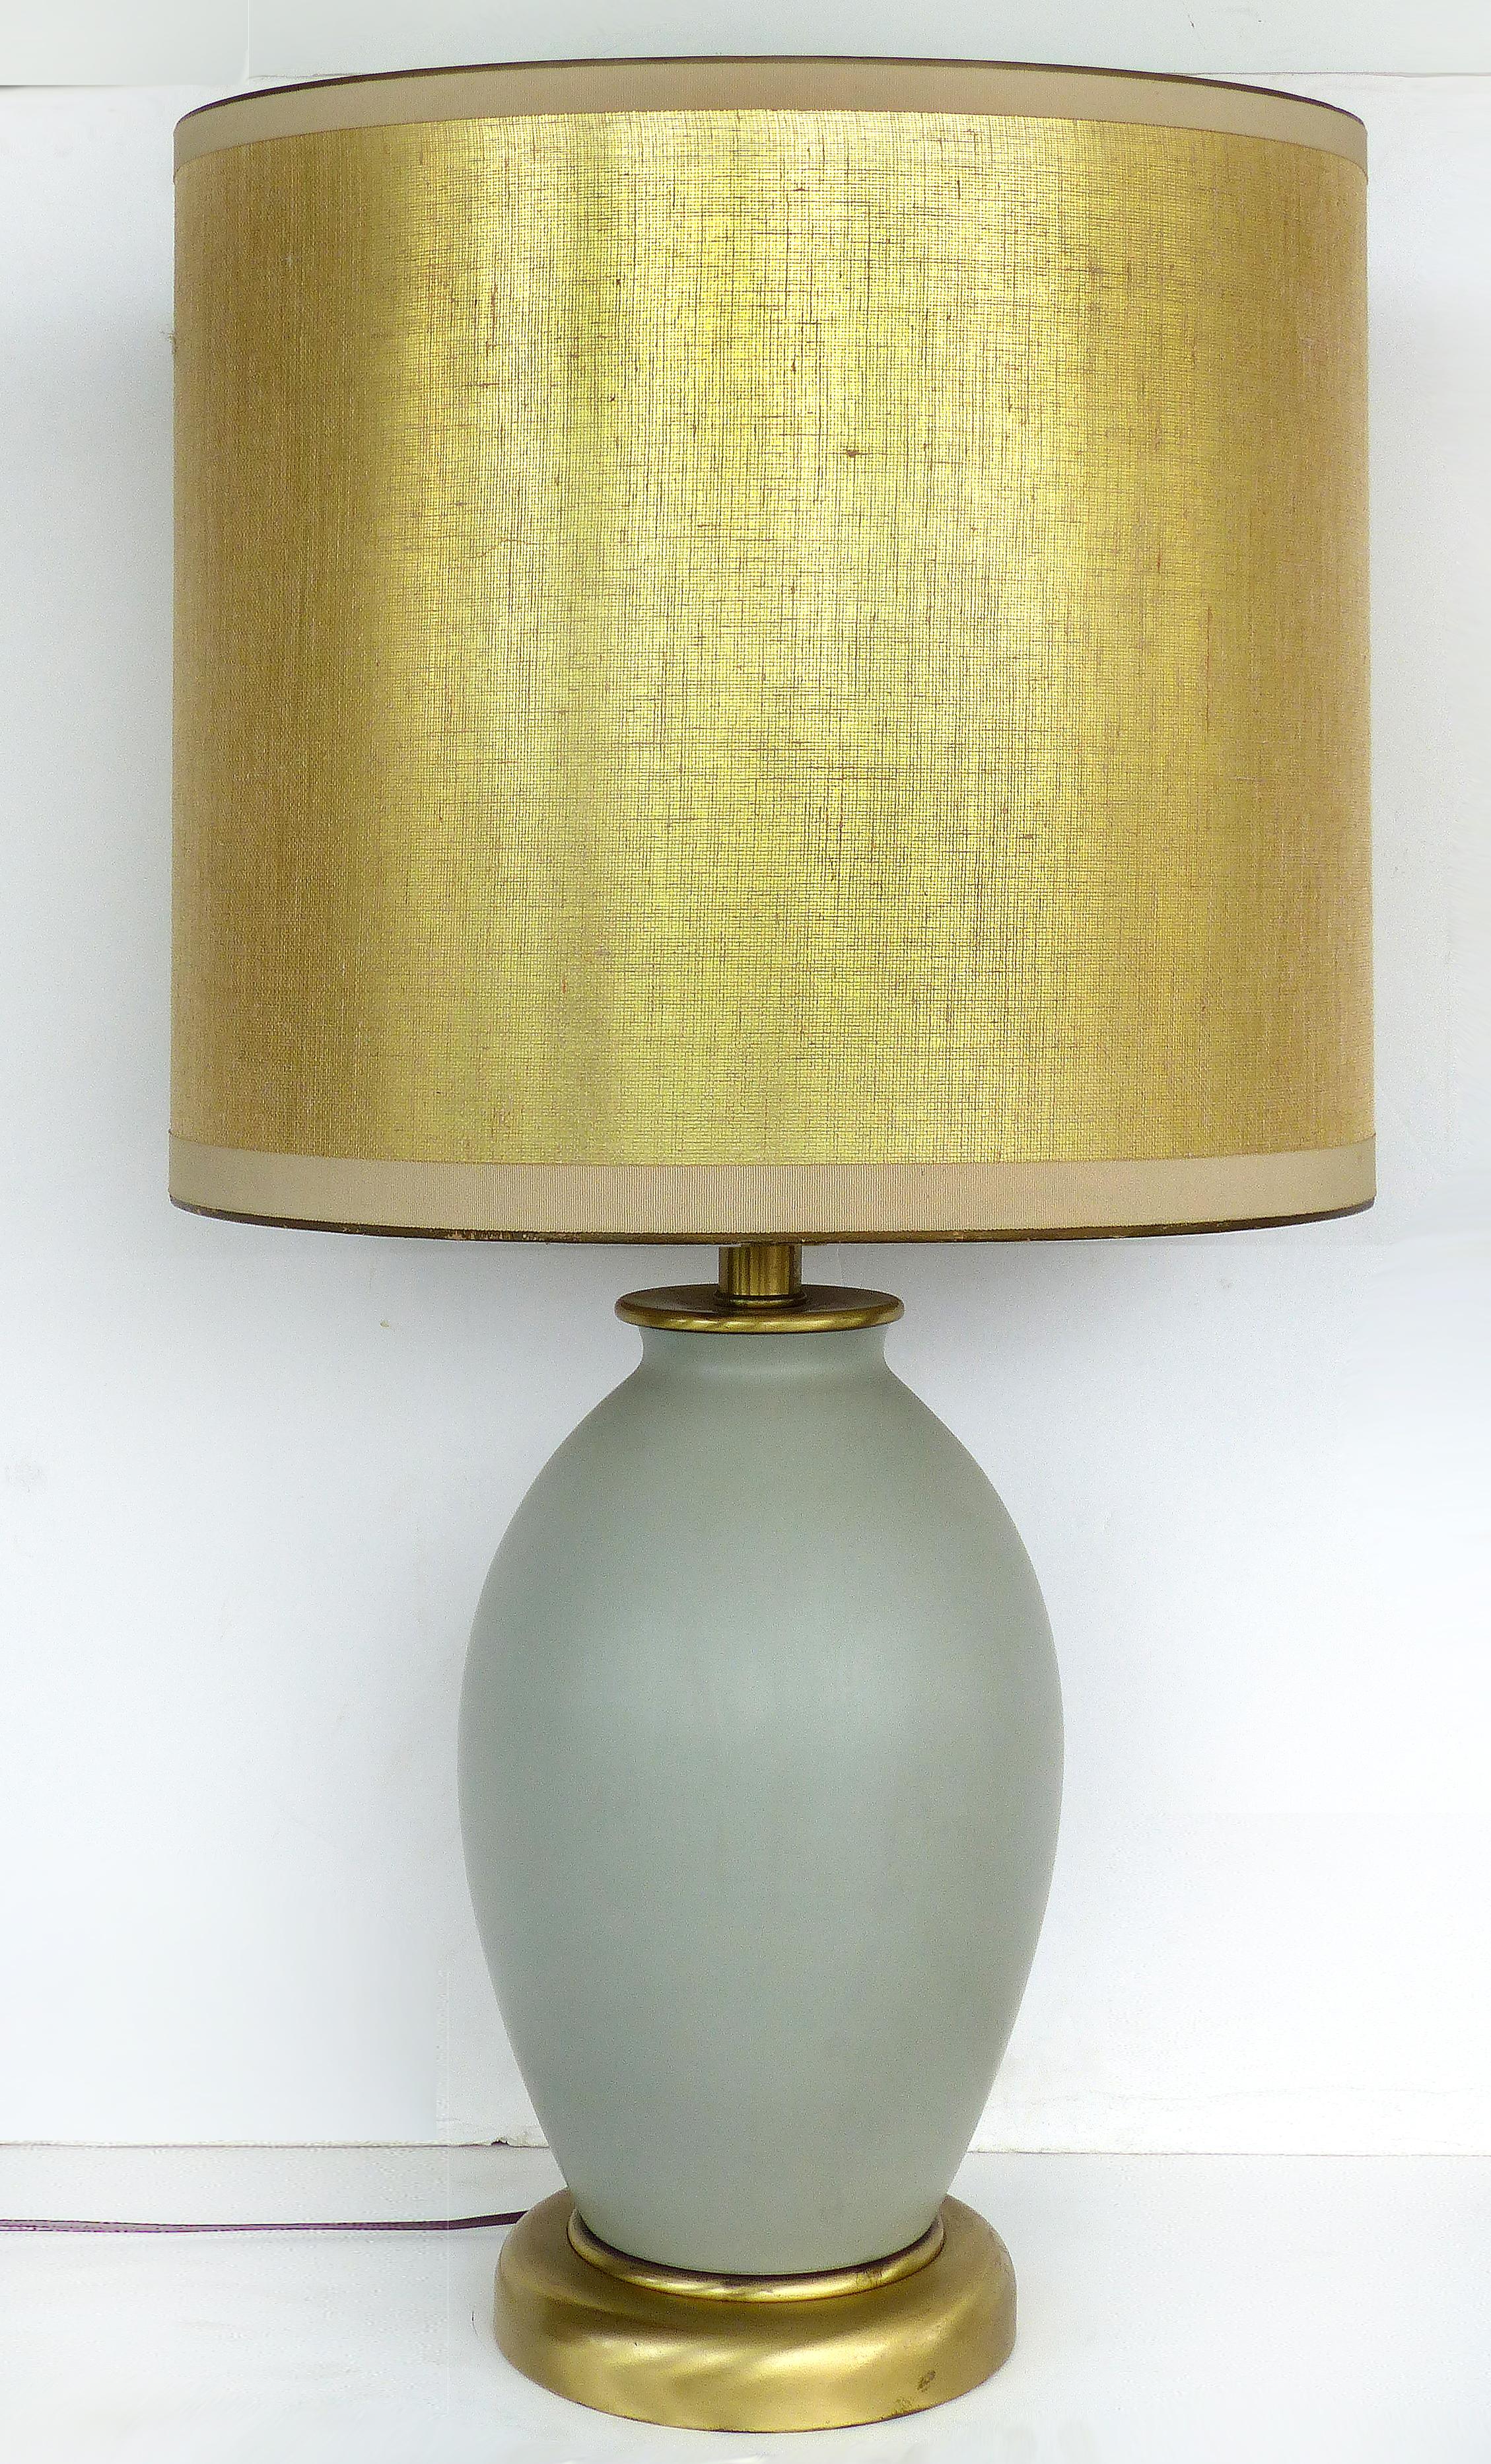 Celadon ceramic lamps with shades and brass bases

Offered for sale is a pair of celadon green ceramic lamps on brass bases with custom shades. These lamps have single sockets which accommodate standard bulbs. One of the shades has a small area of